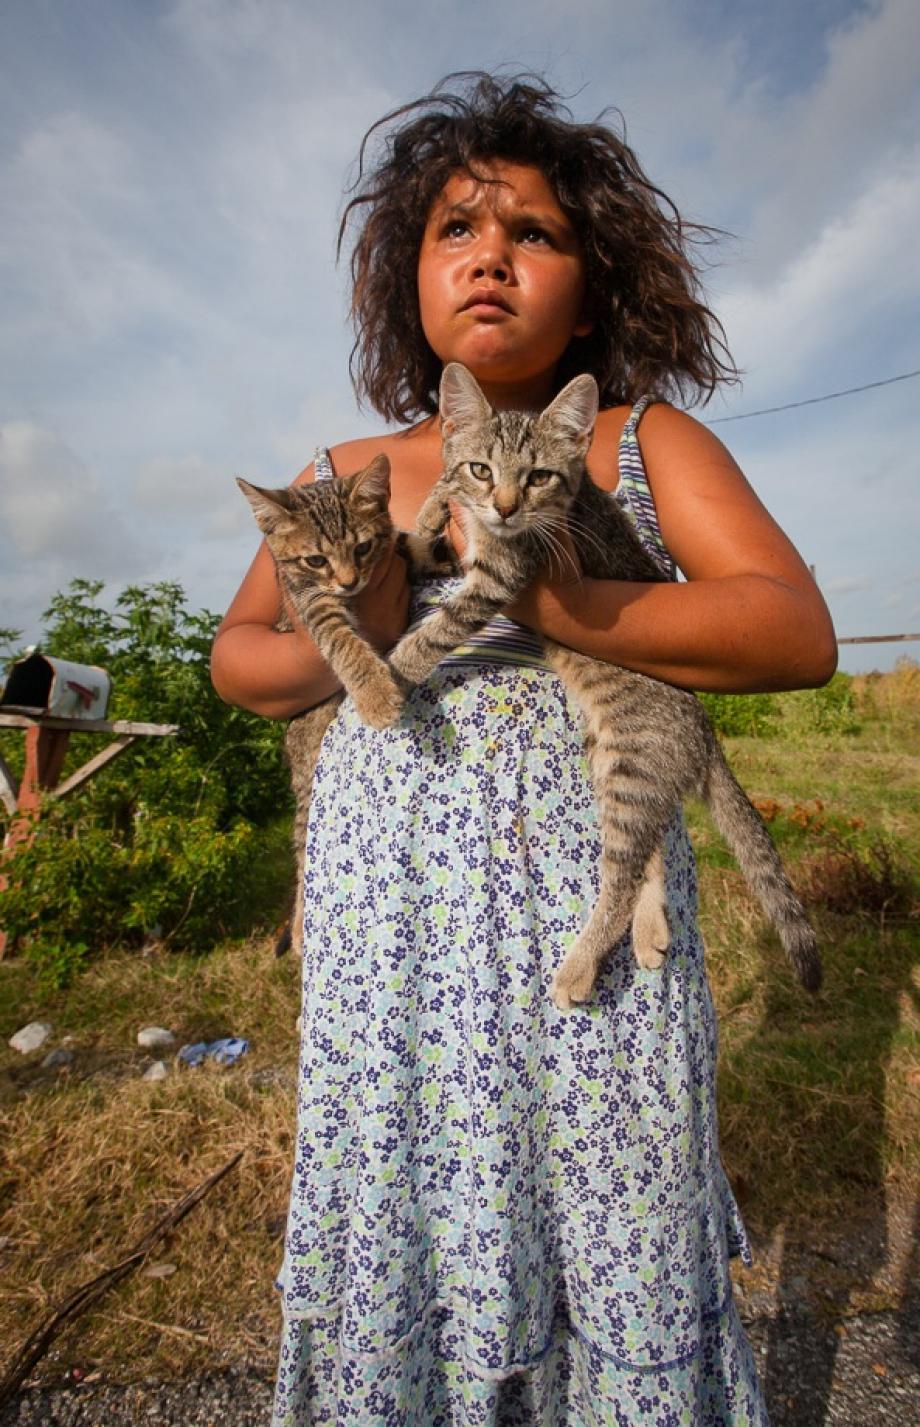 Member of the Biloxi-Chimacha-Choctaw tribe on Isle de Jean Charles with kittens.